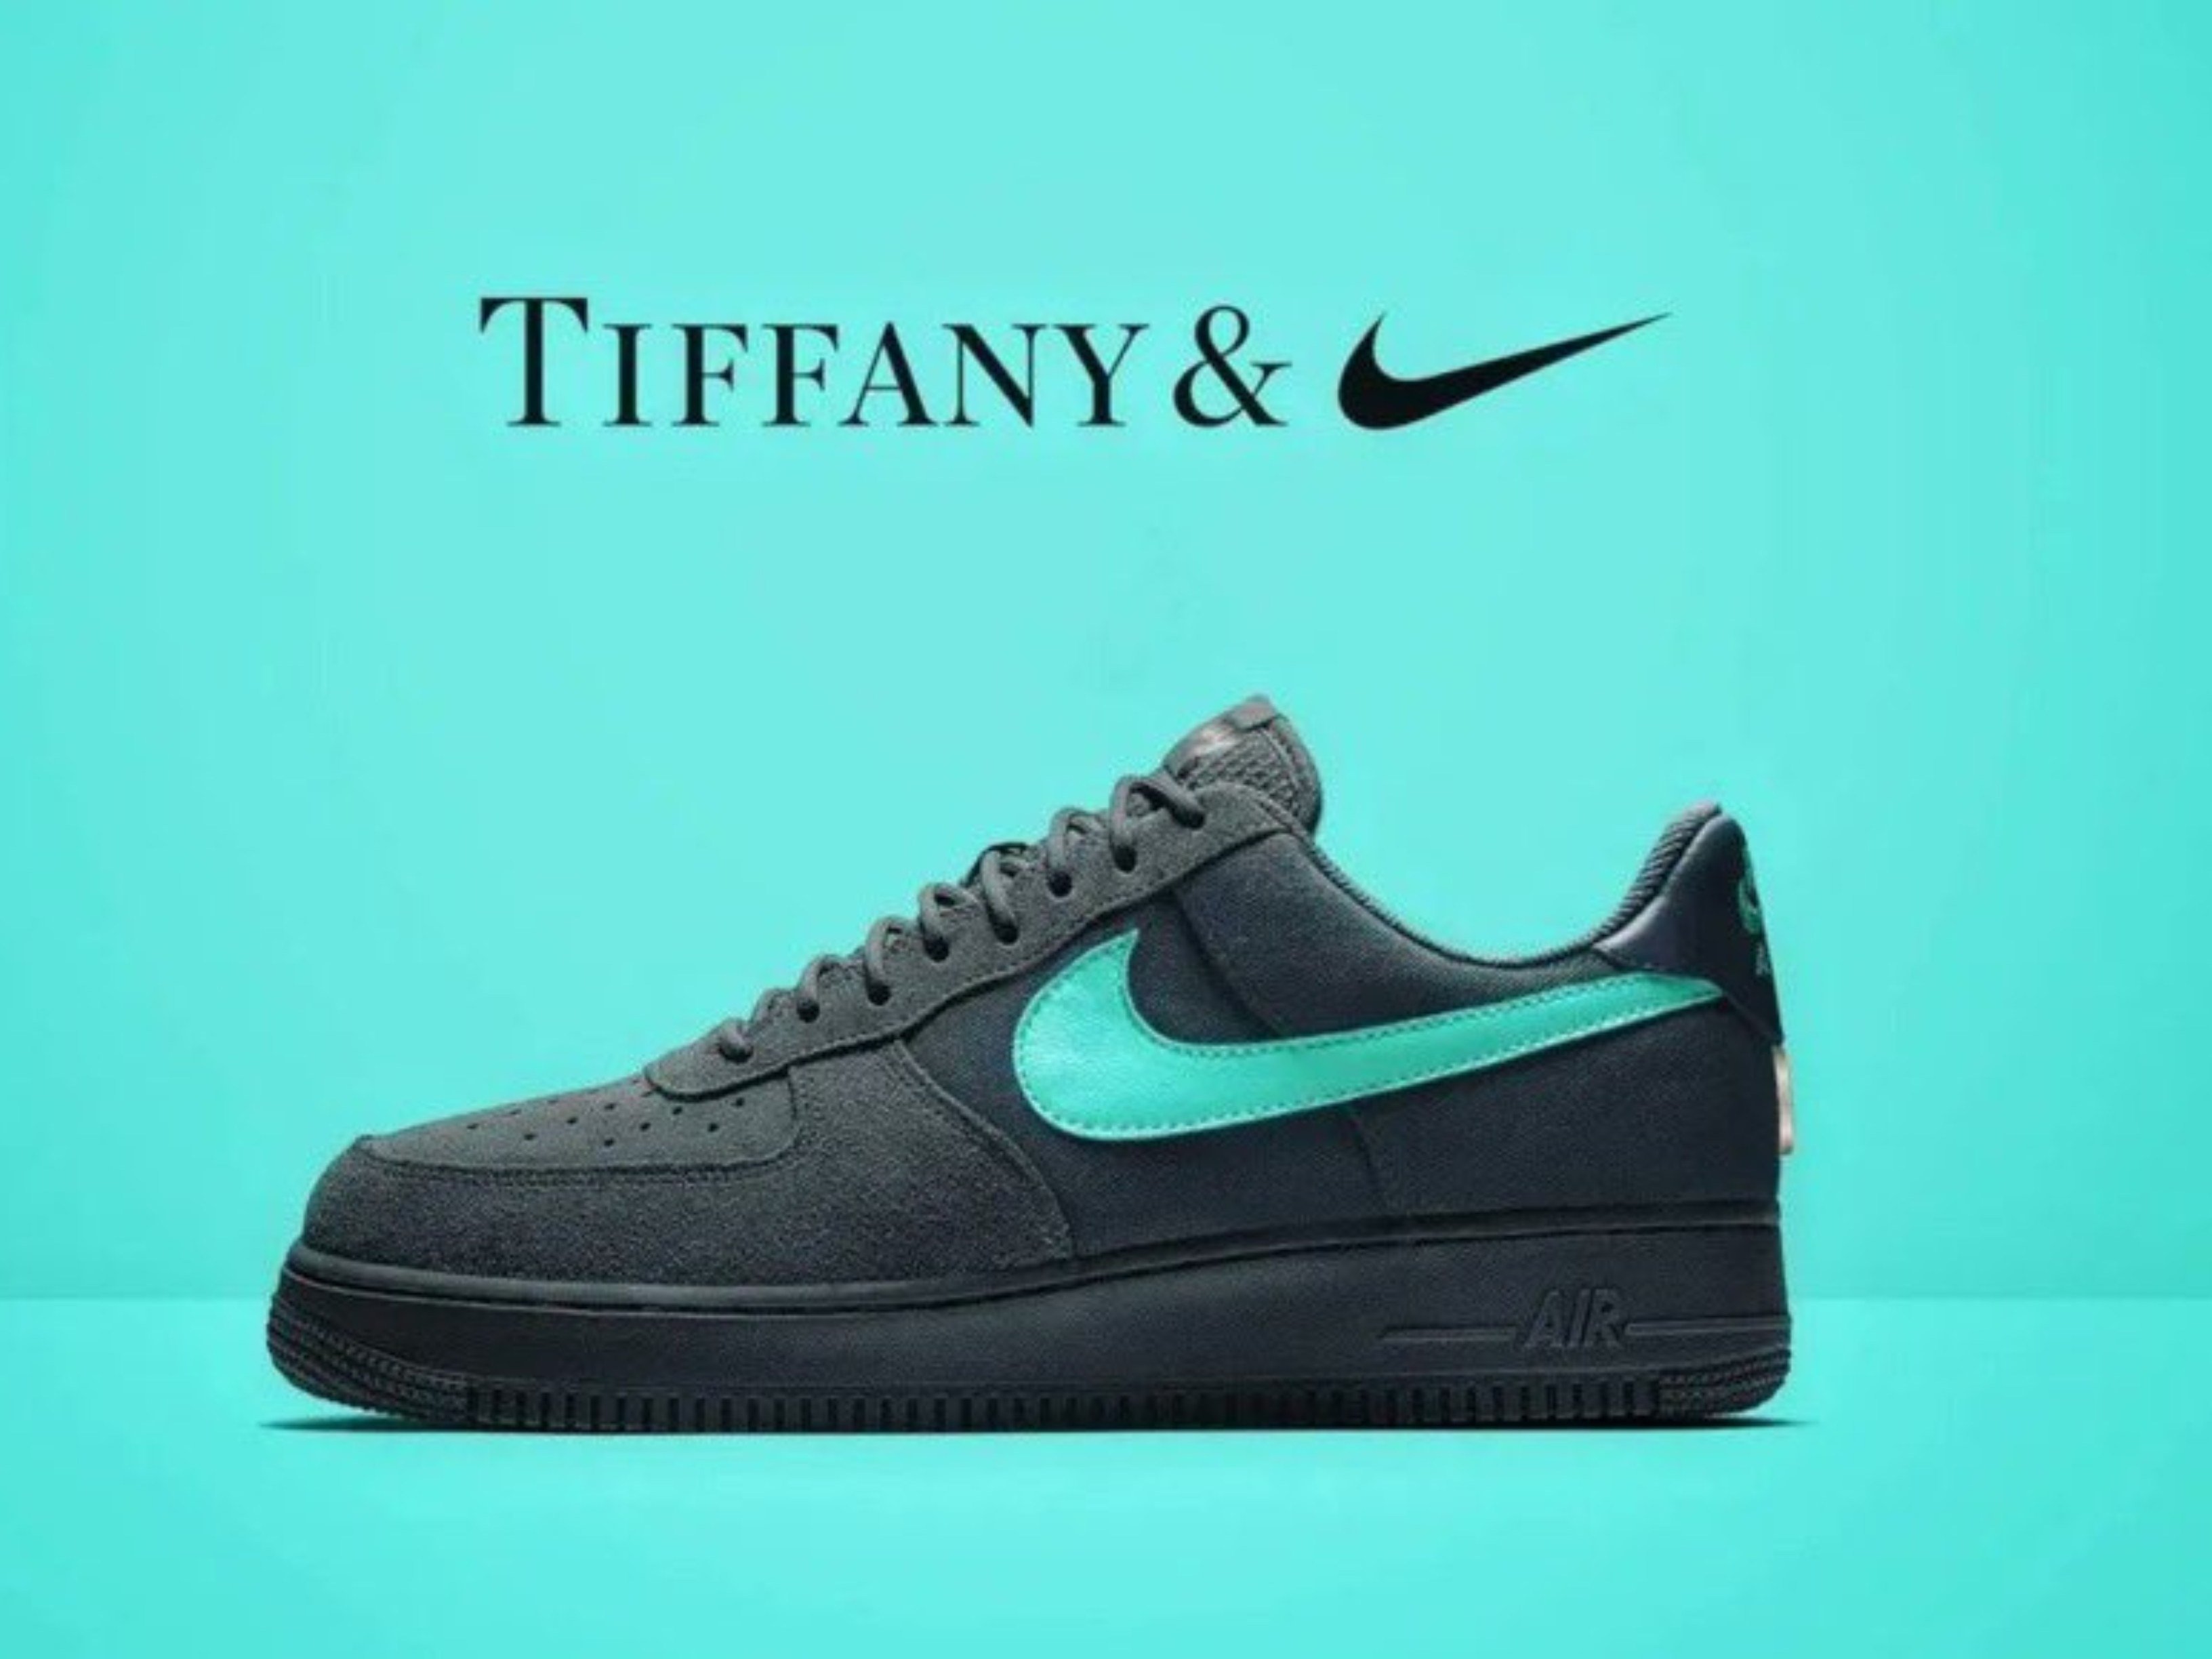 radikal udtale Benign Nike and Tiffany & Co. to launch US$400 sneakers: the Air Force 1 '1837'  limited-edition shoe collaboration comes after the LVMH brand worked with  Beyoncé and Jay-Z – but some are calling